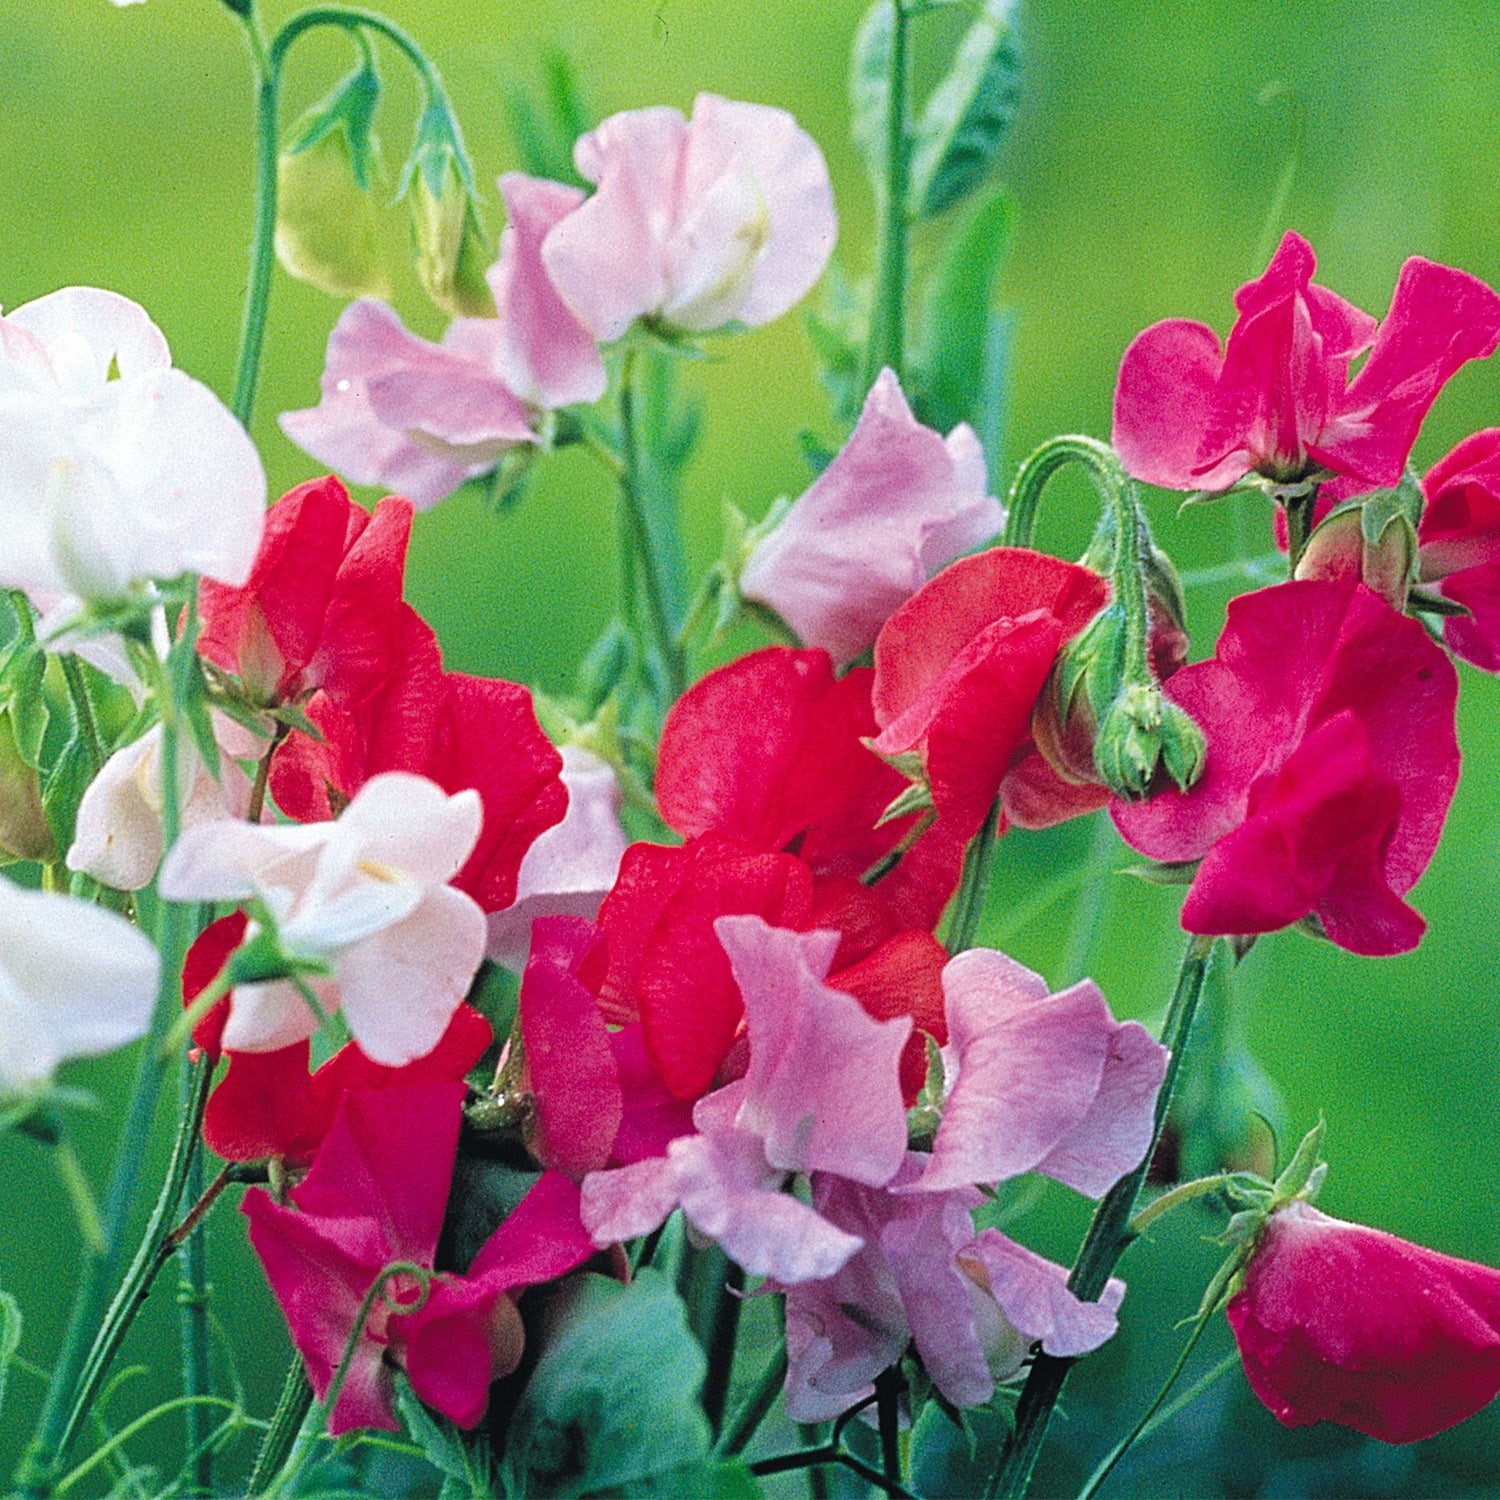 Mixed Colors Royal Family Sweet Pea Flower seeds fully matured and blooming their beautifully ruffled blooms in colors of red, pink and white.